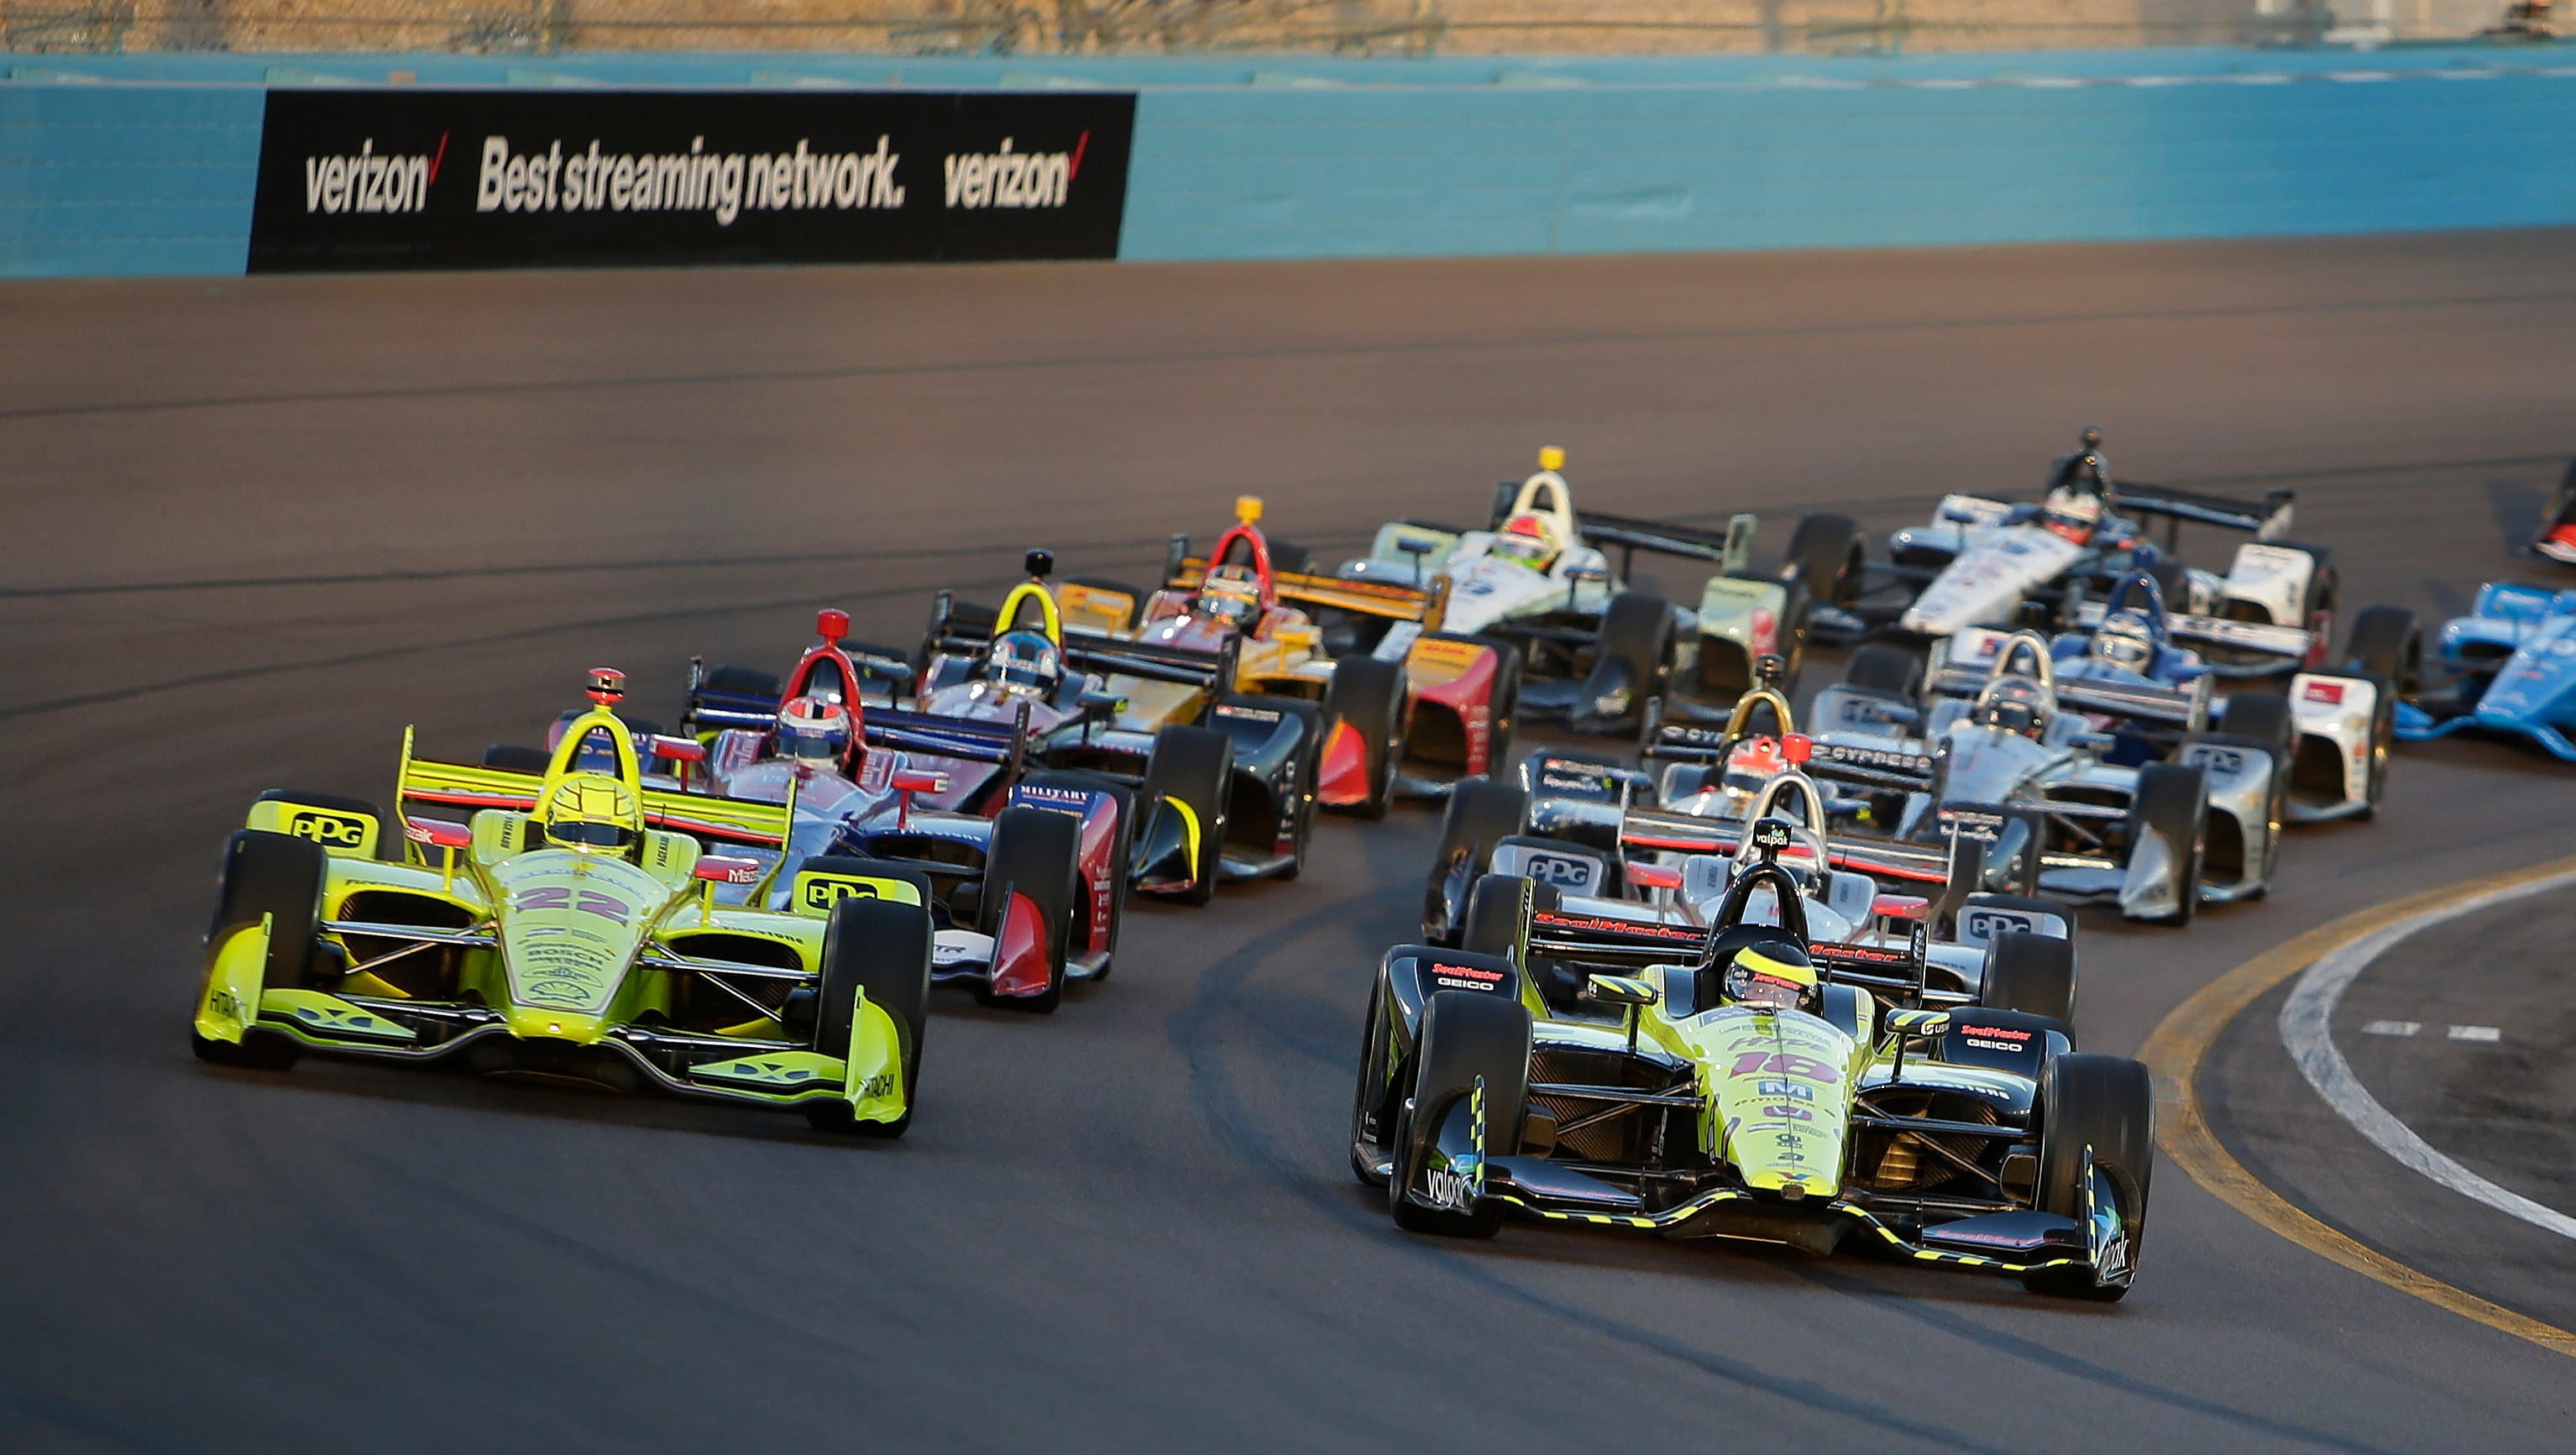 frequently Landmark Optimism 6 tracks that could replace Phoenix on IndyCar schedule in 2019